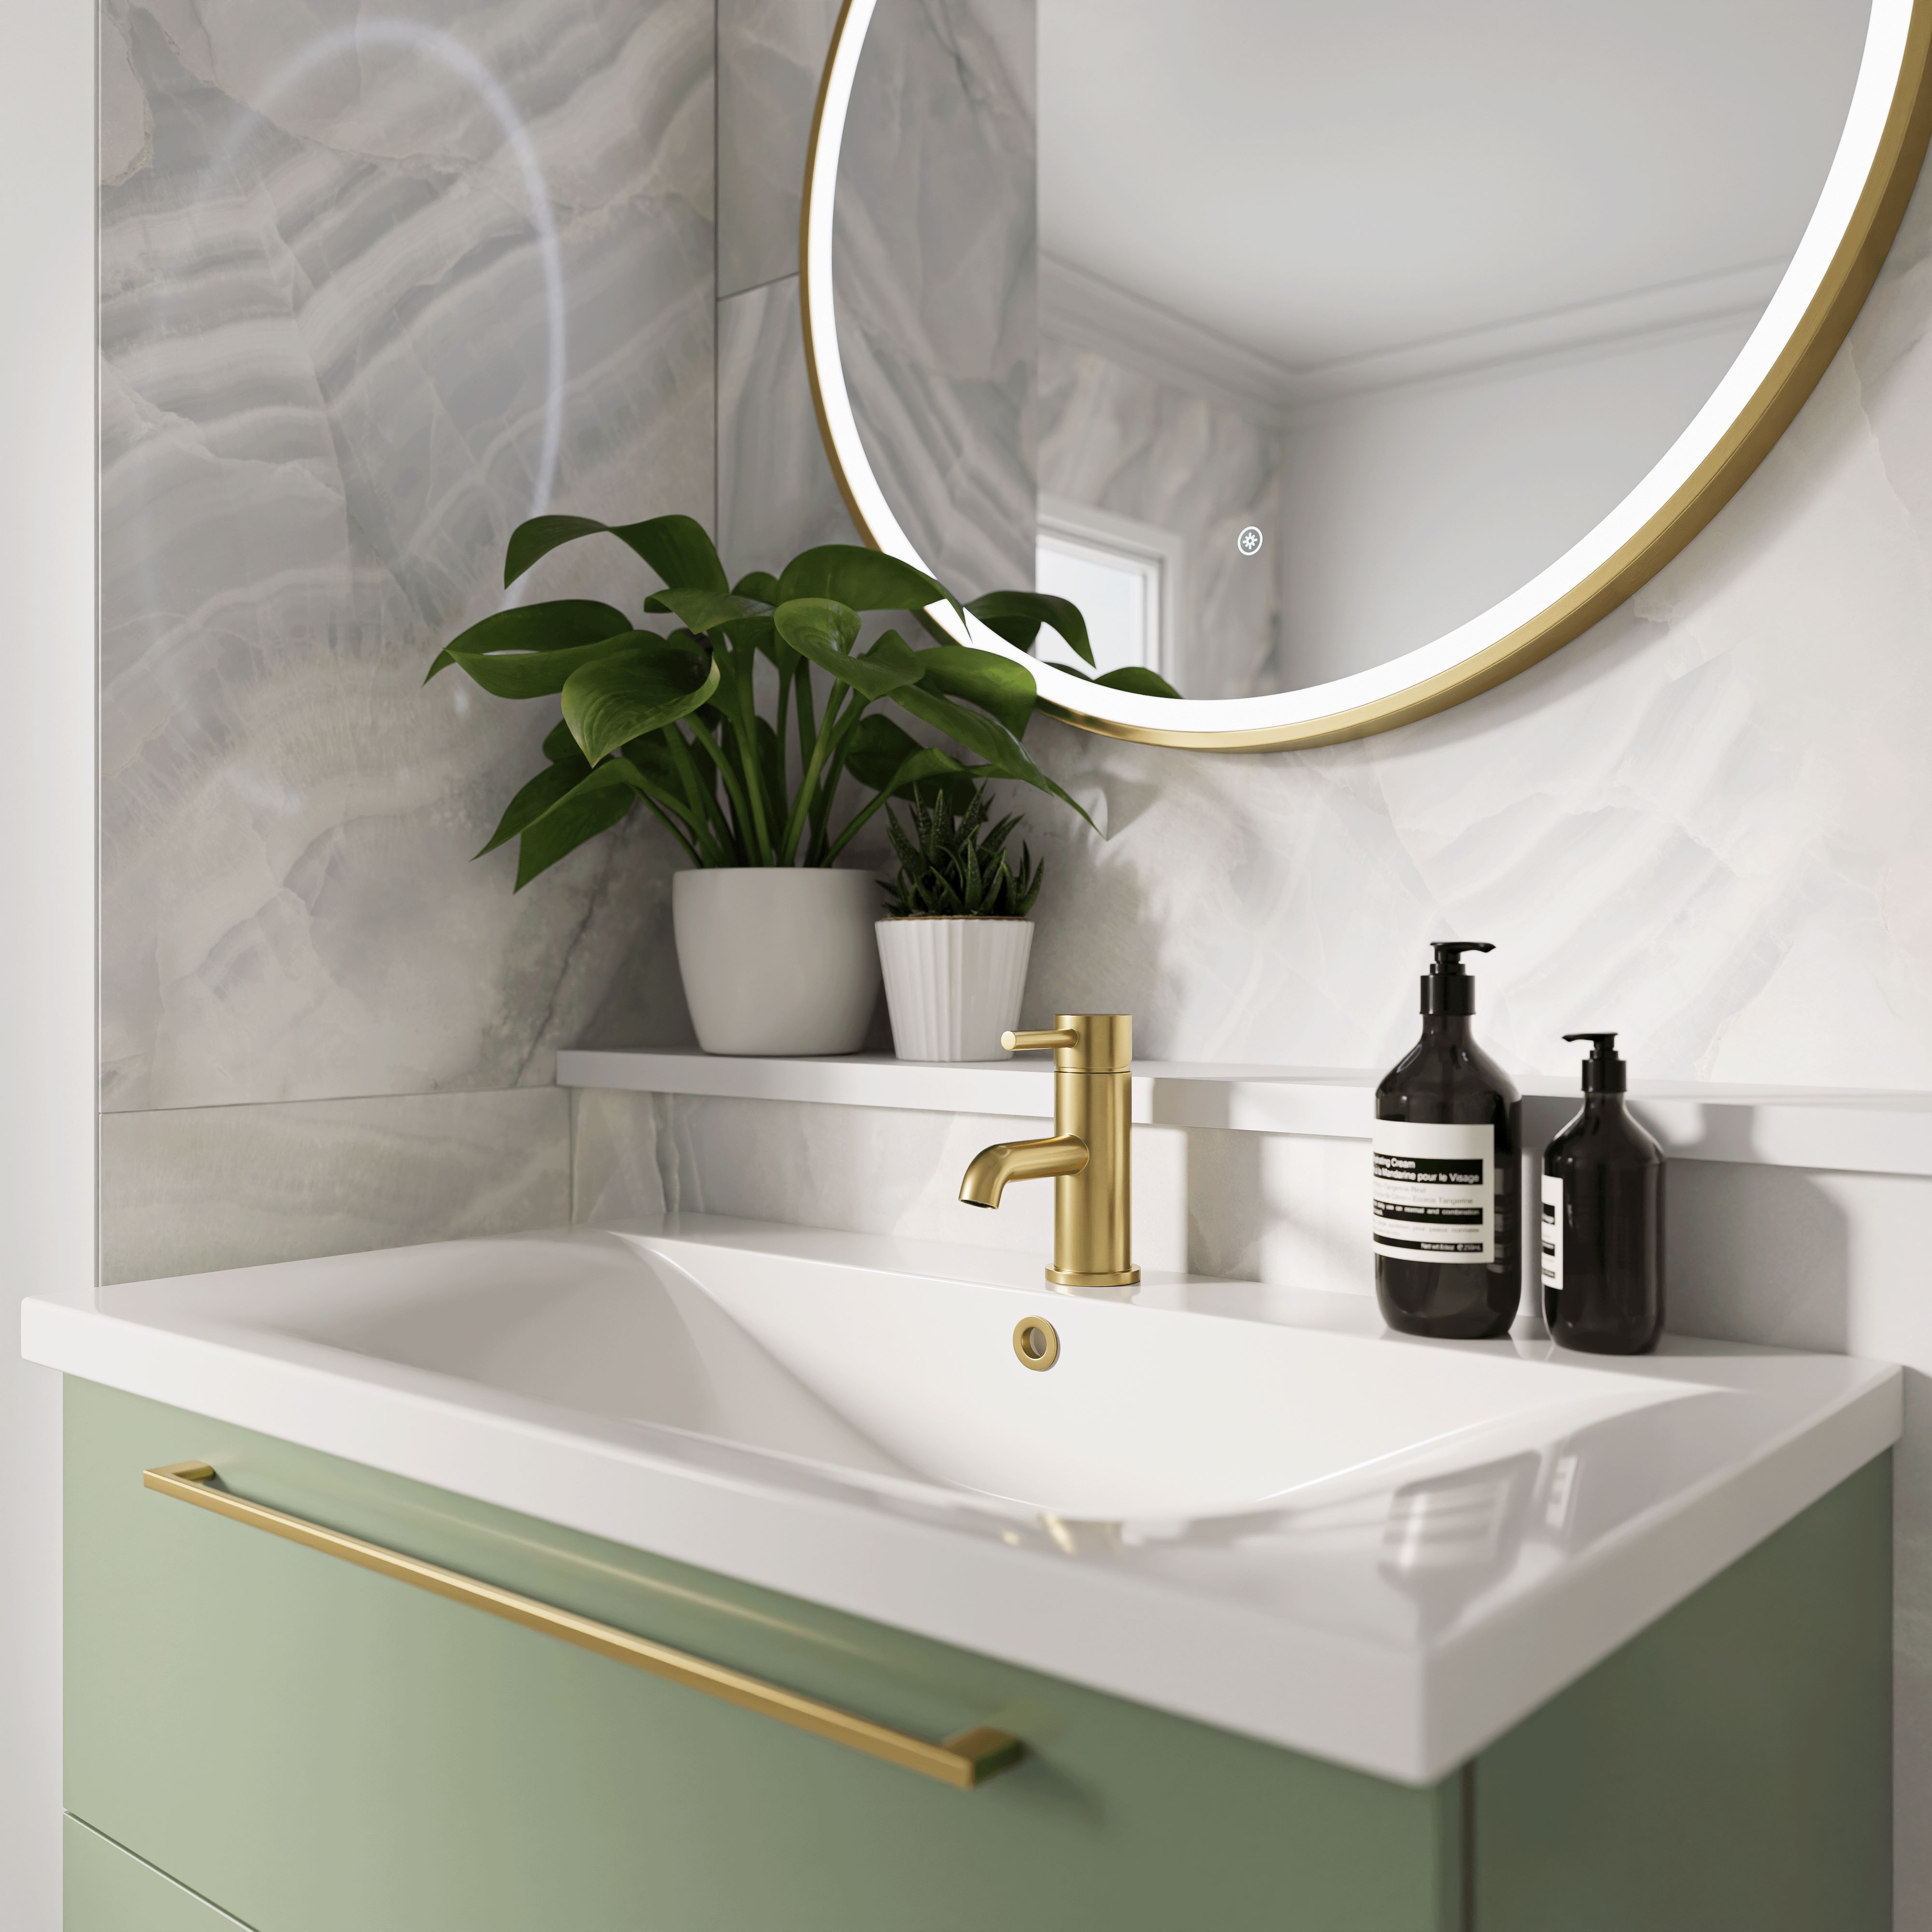 bathroom sink unit with brass tap and greenery